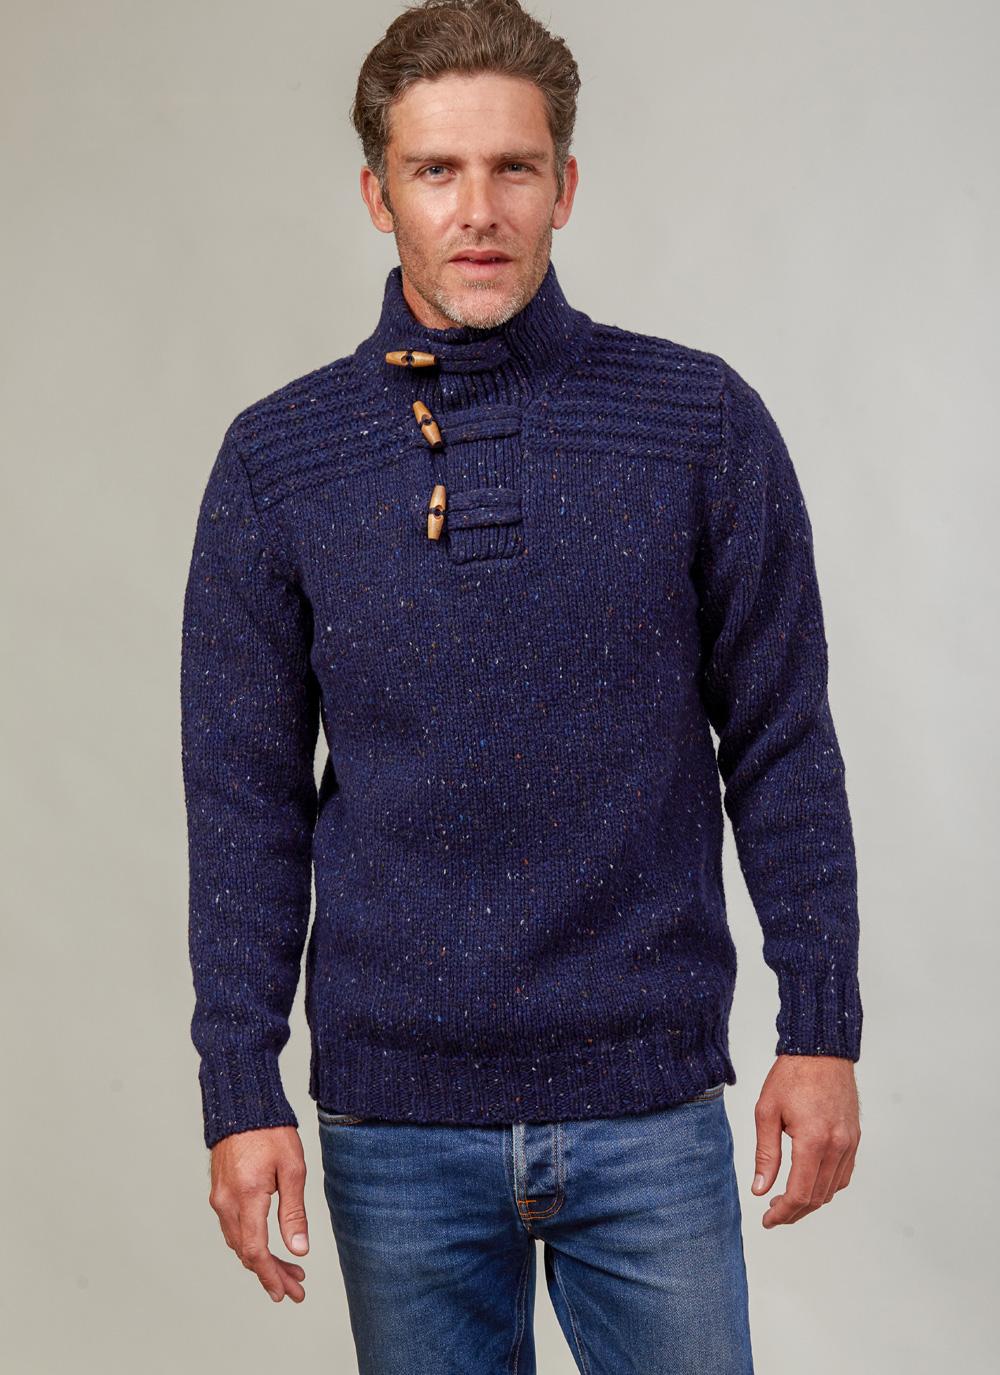 Mens 3 Toggle Button Sweater